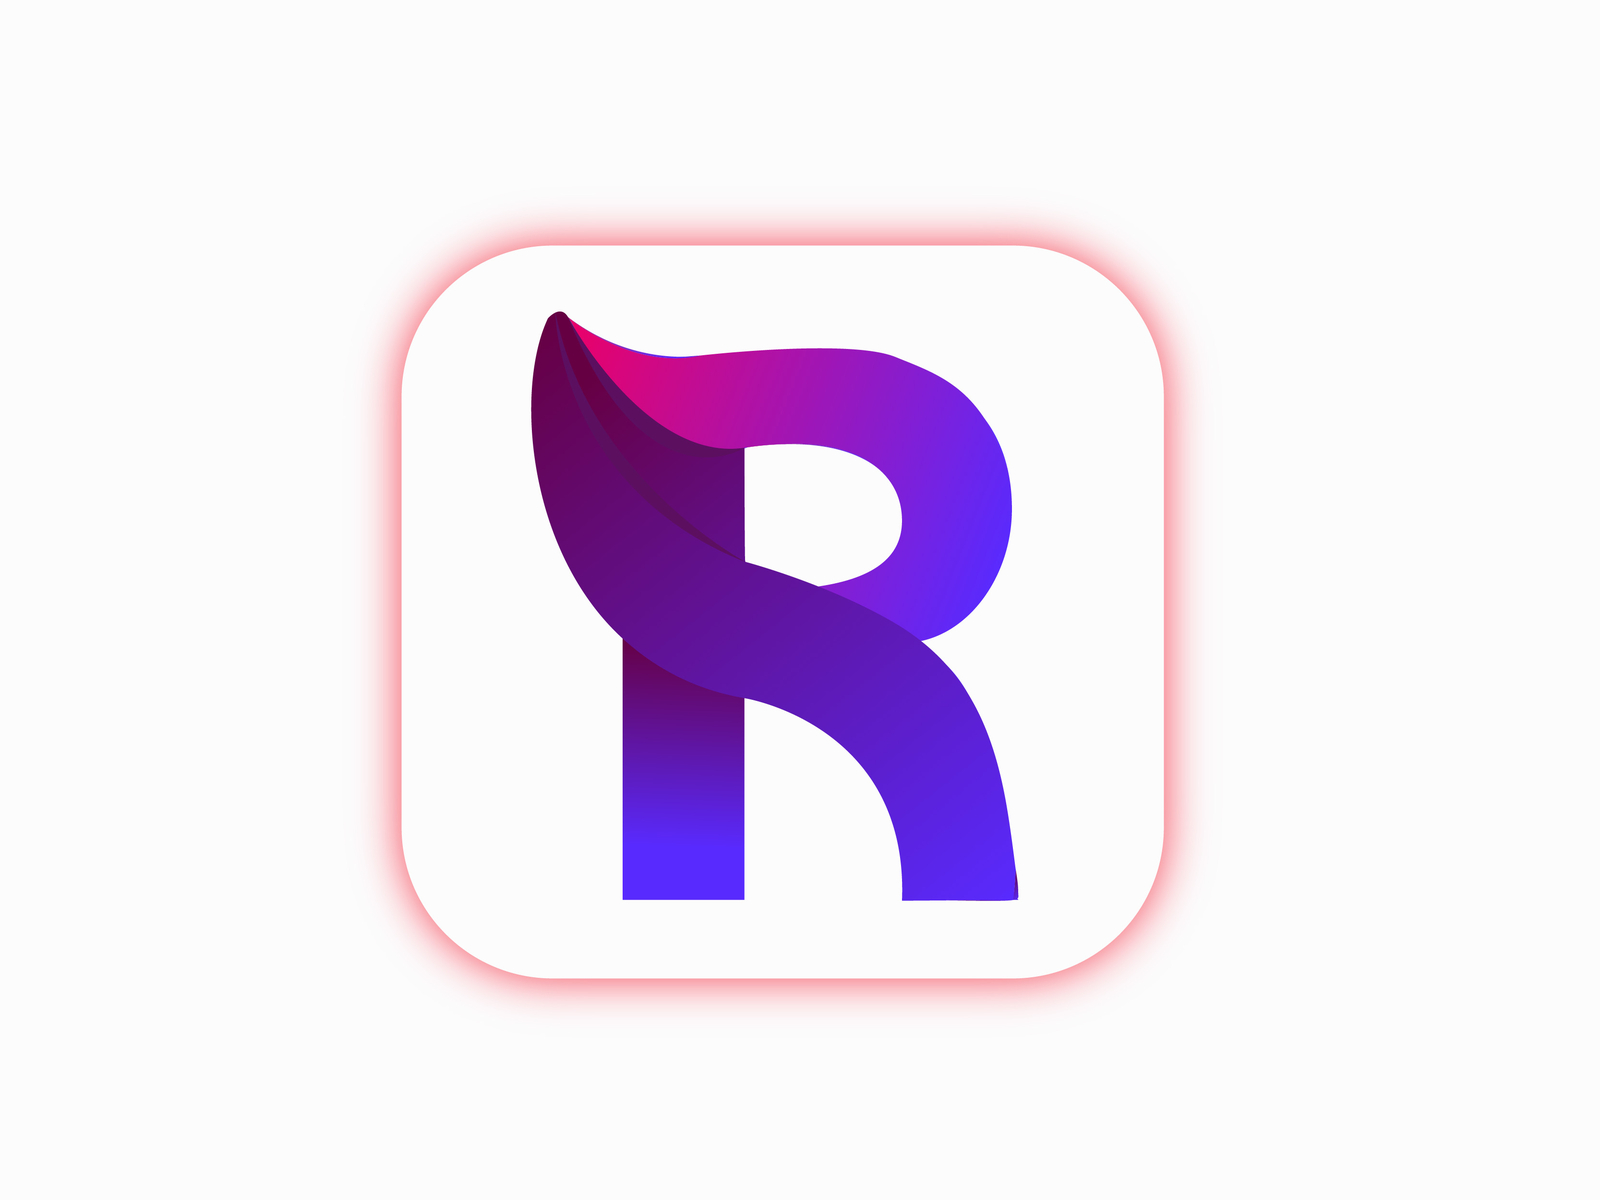 RP/Ronypa my name logo by Rony Pa - Logo Designer 🔵 on Dribbble